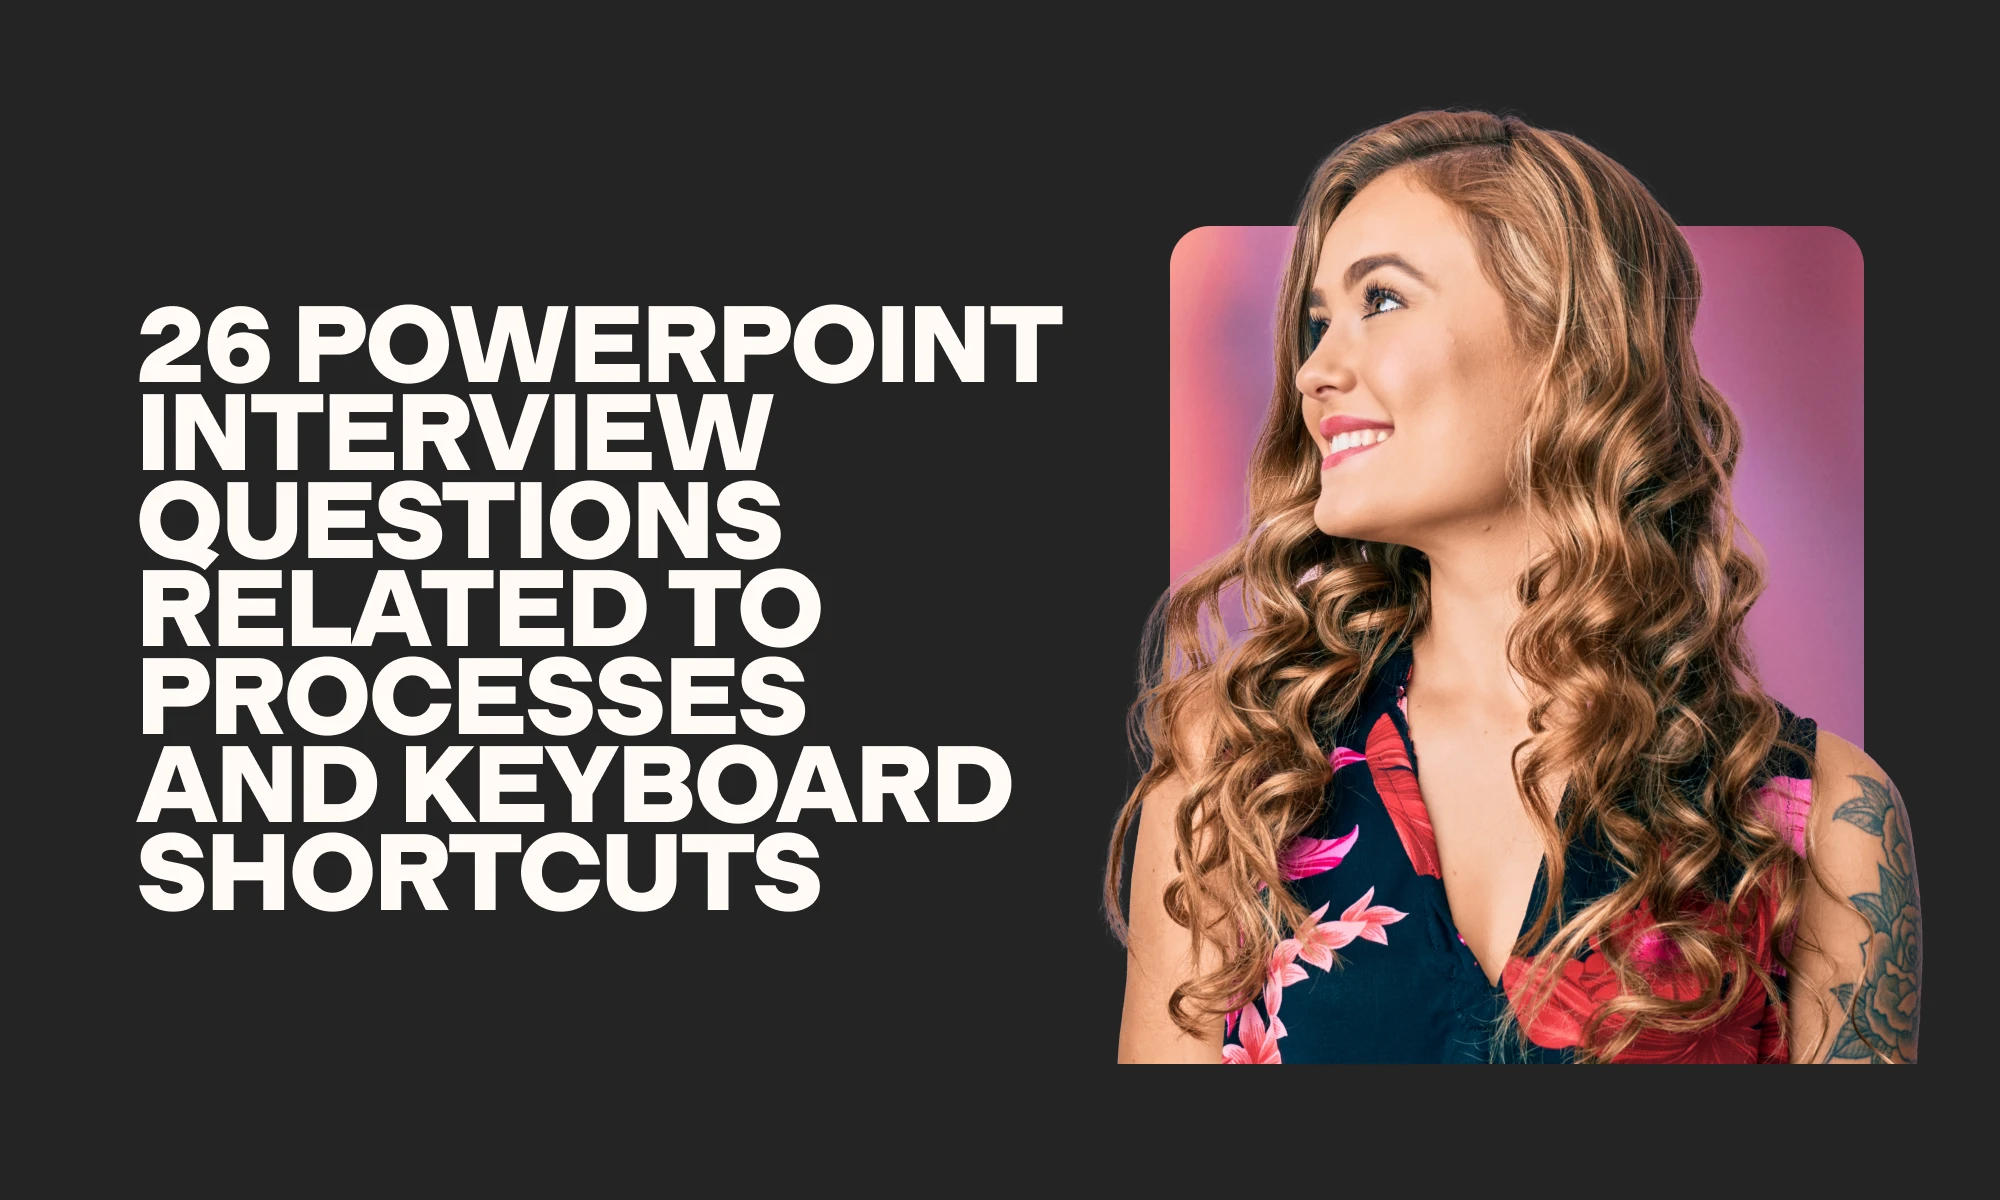 PowerPoint interview questions related to processes and keyboard shortcuts